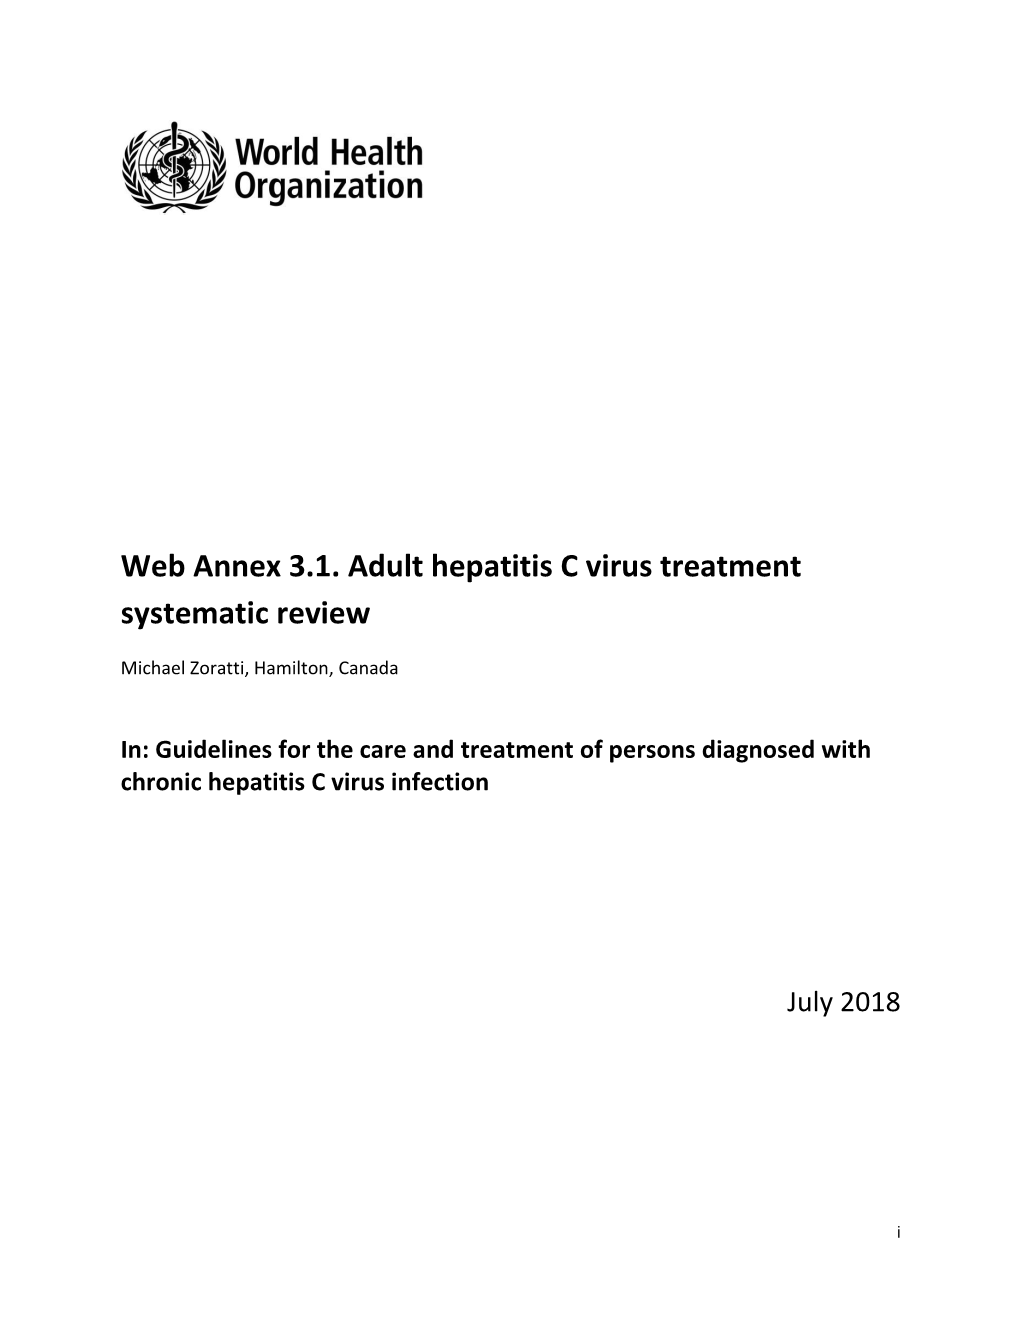 Web Annex 3.1. Adult Hepatitis C Virus Treatment Systematic Review